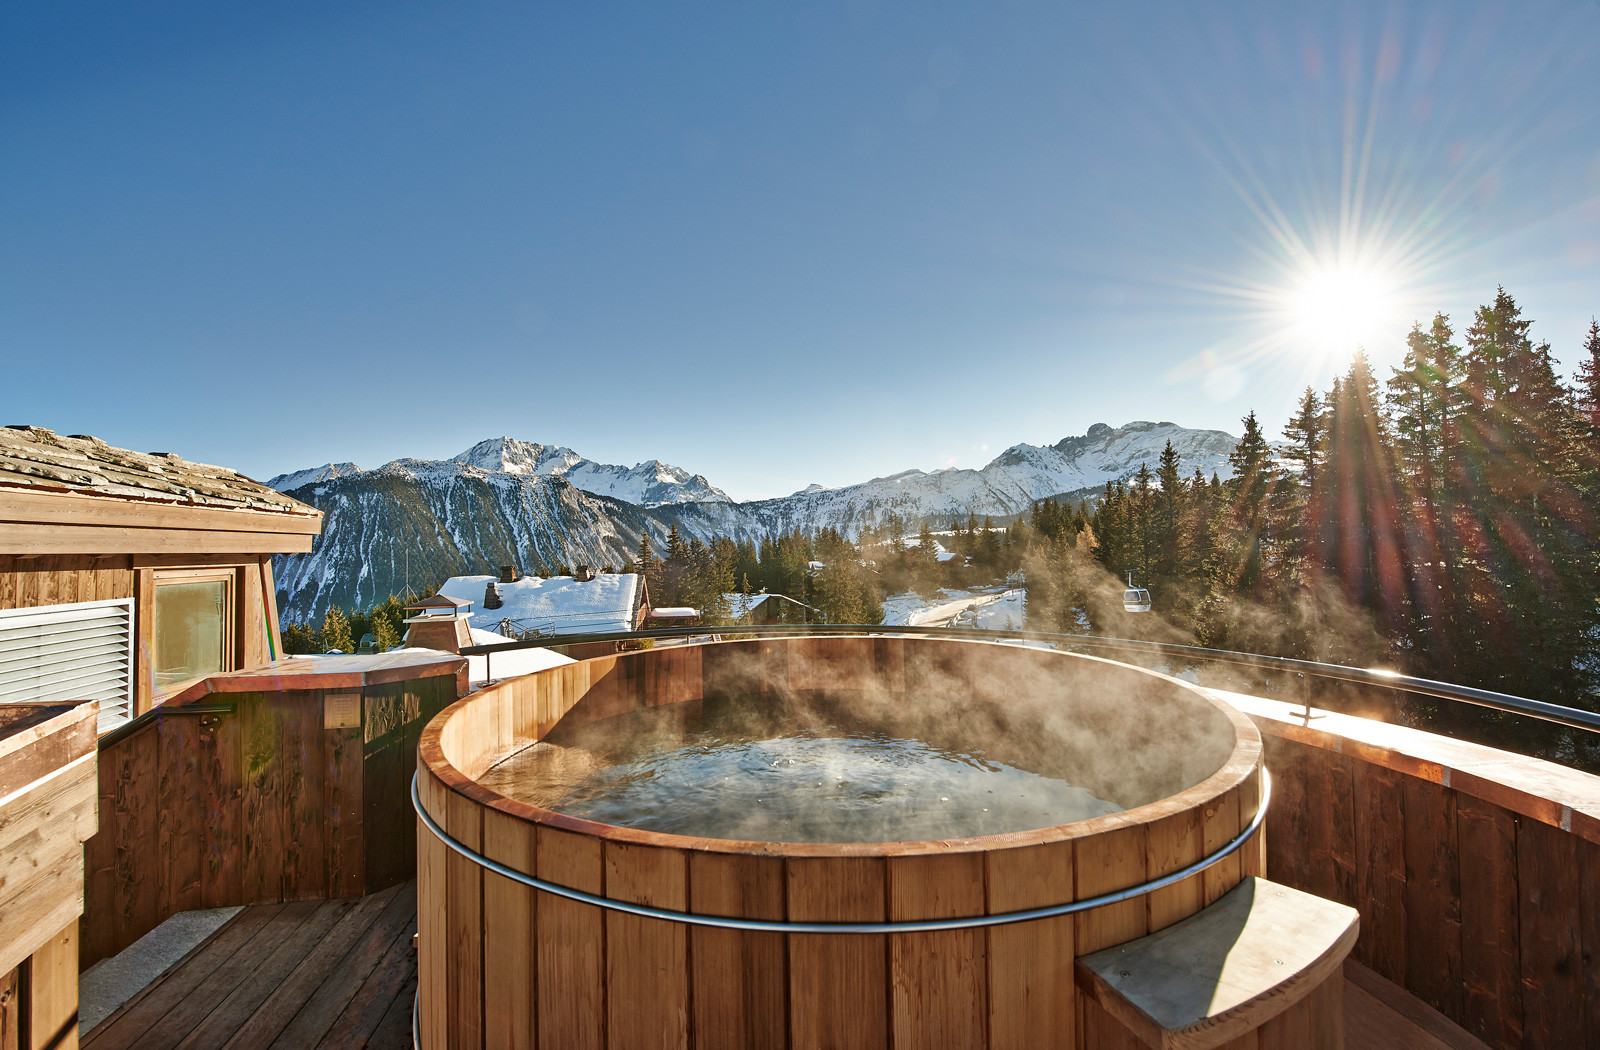 Kings-avenue-courchevel-sauna-jacuzzi-hammam-swimming-pool-childfriendly-parking-kids-playroom-games-room-boot-heaters-fireplace-skii-in-skii-out-area-courchevel-035